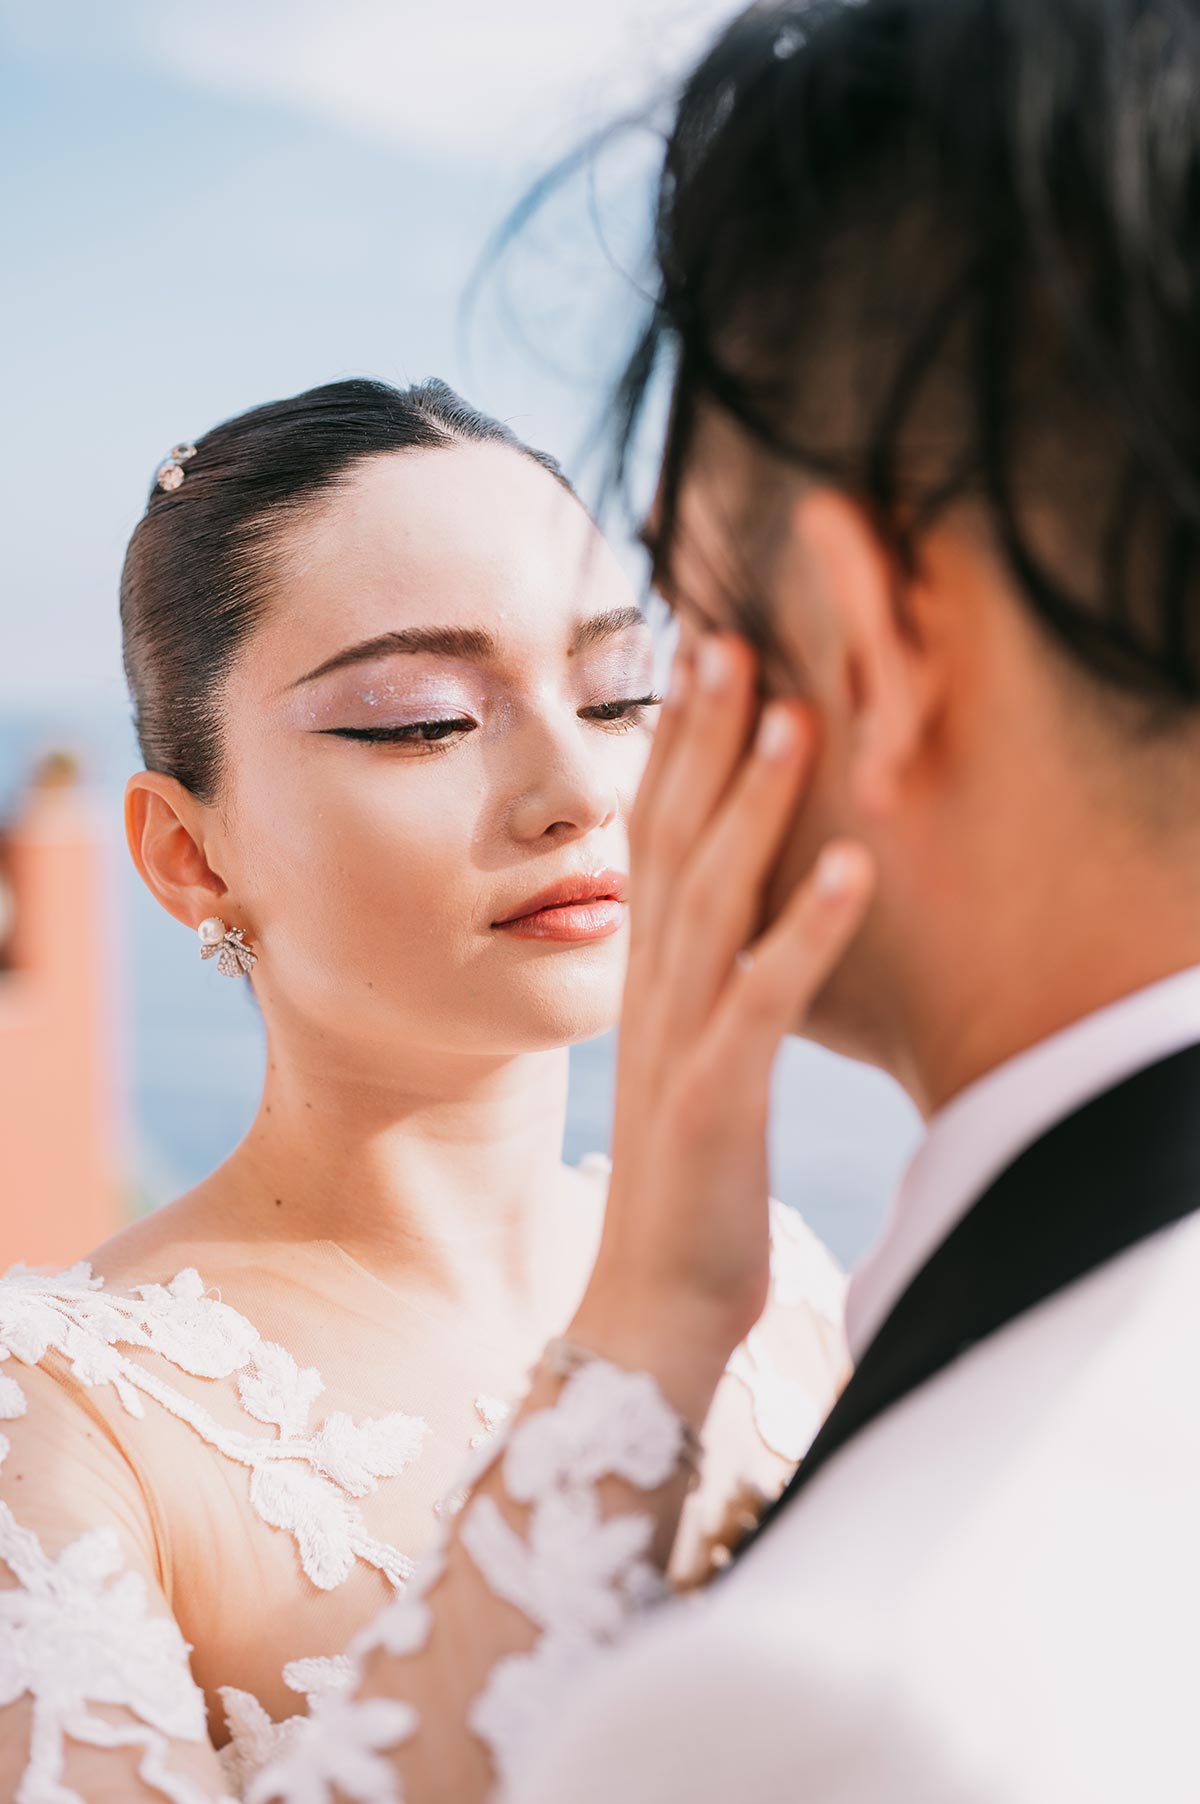 Italian wedding traditions | Emiliano Russo | Villa dei Fisici wedding 5 3 | Ceremonies are essential to many cultures worldwide, and weddings are no exception. Italian wedding traditions are interesting to incorporate.